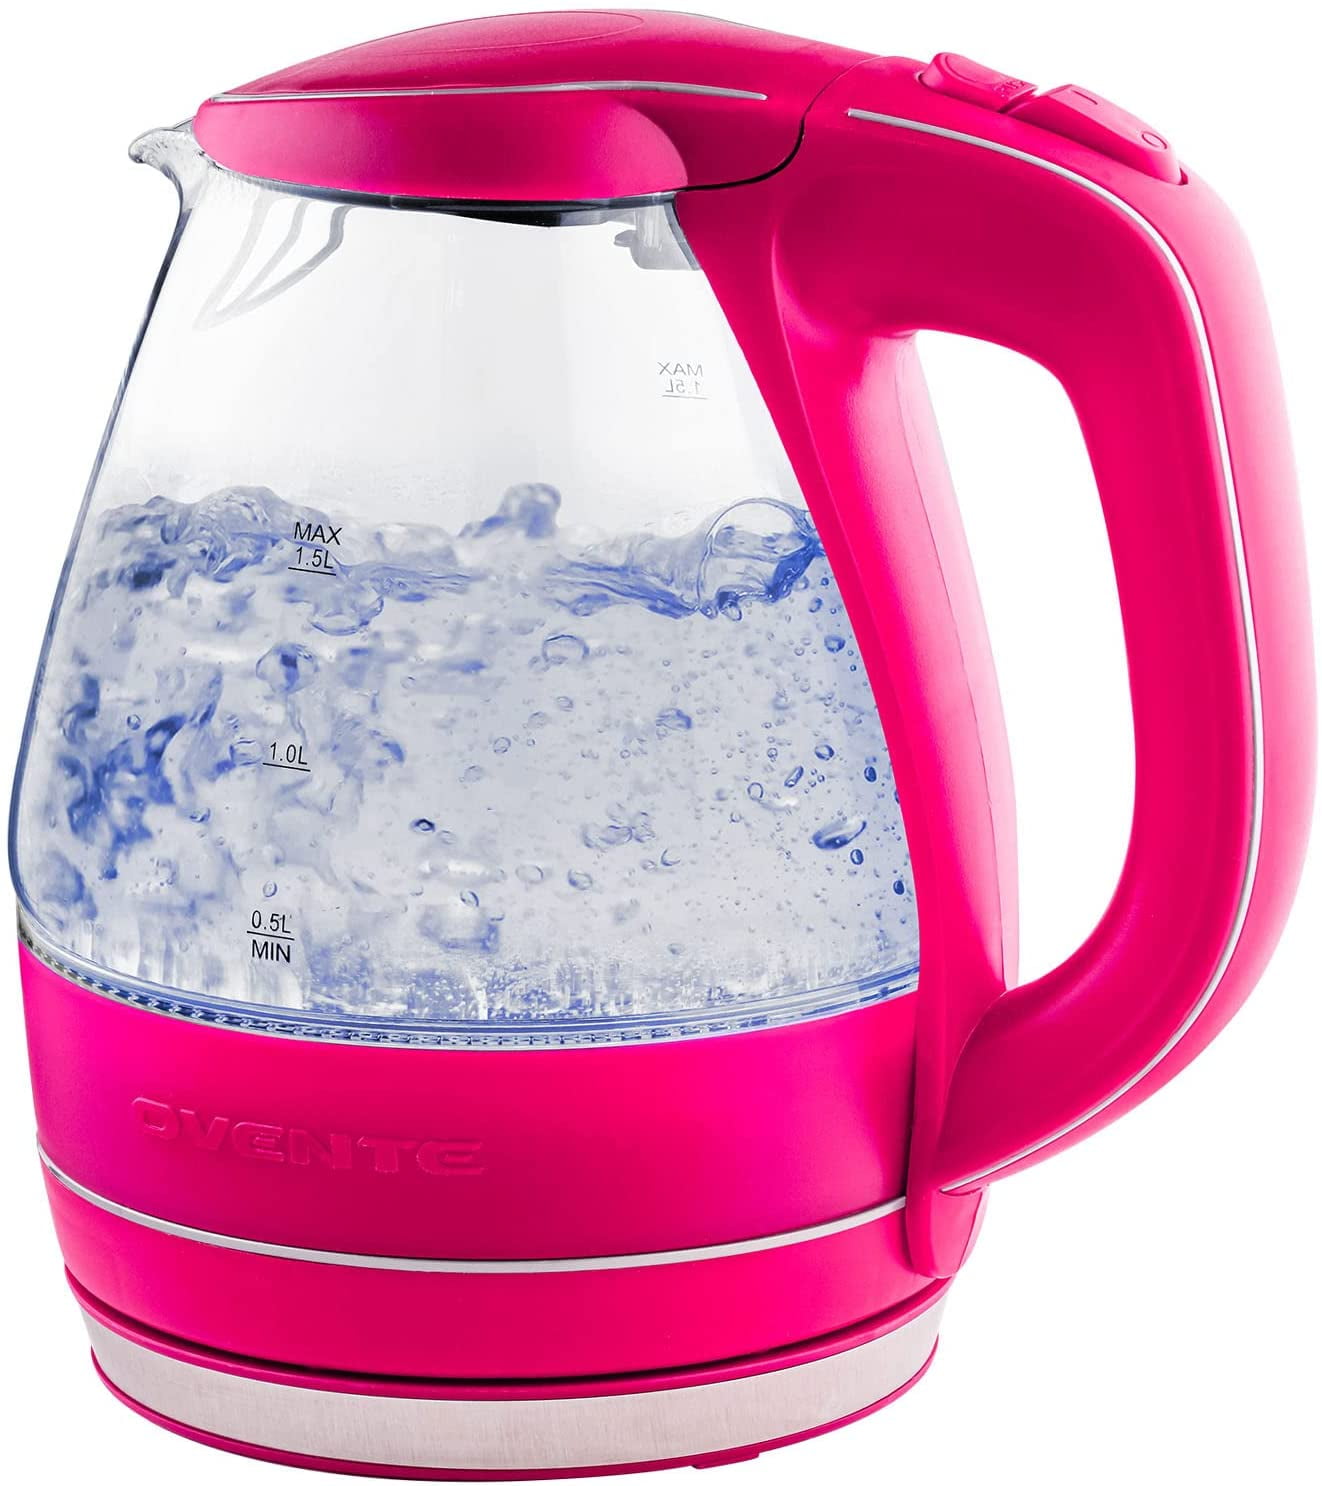  Electric Kettle, Hot Tea Maker, Electric Glass Kettle - Electric  Kettles for Boiling Water for 1.8 L, Temperature Control Electric Kettle  with Tea Infuse, with 24 Smart Menu (Color : Pink